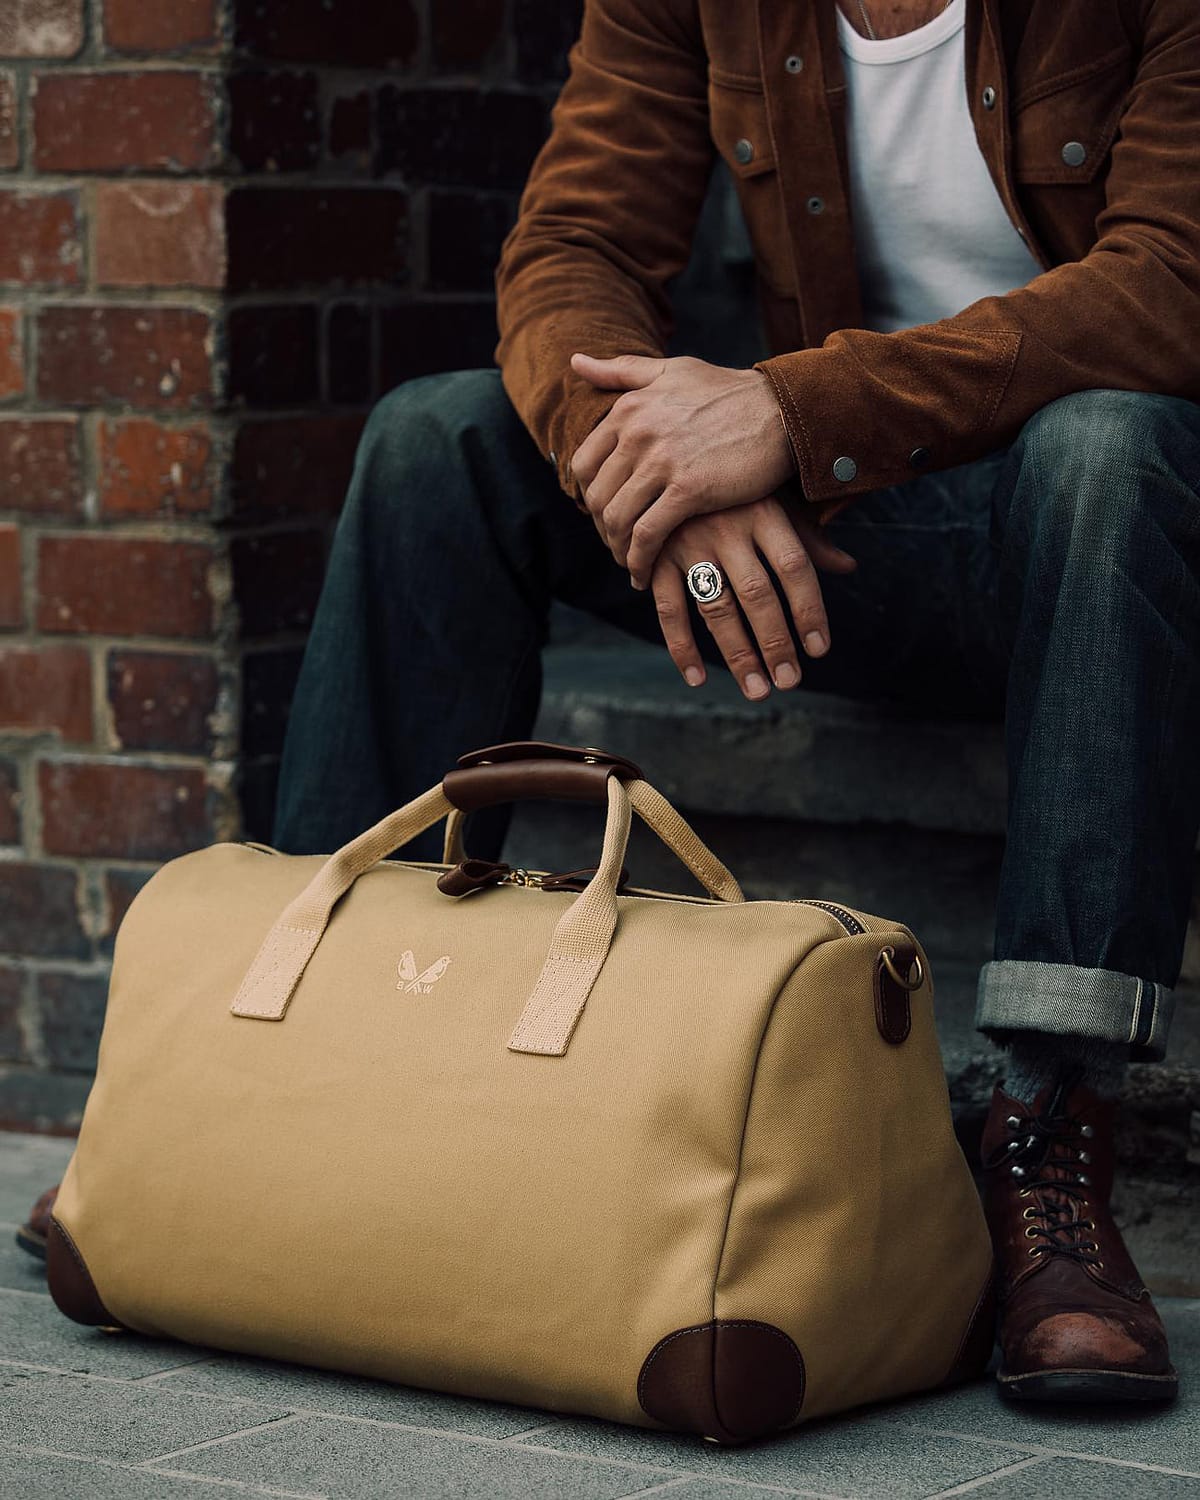 The Best Duffel Bags Whatever You've Got Planned